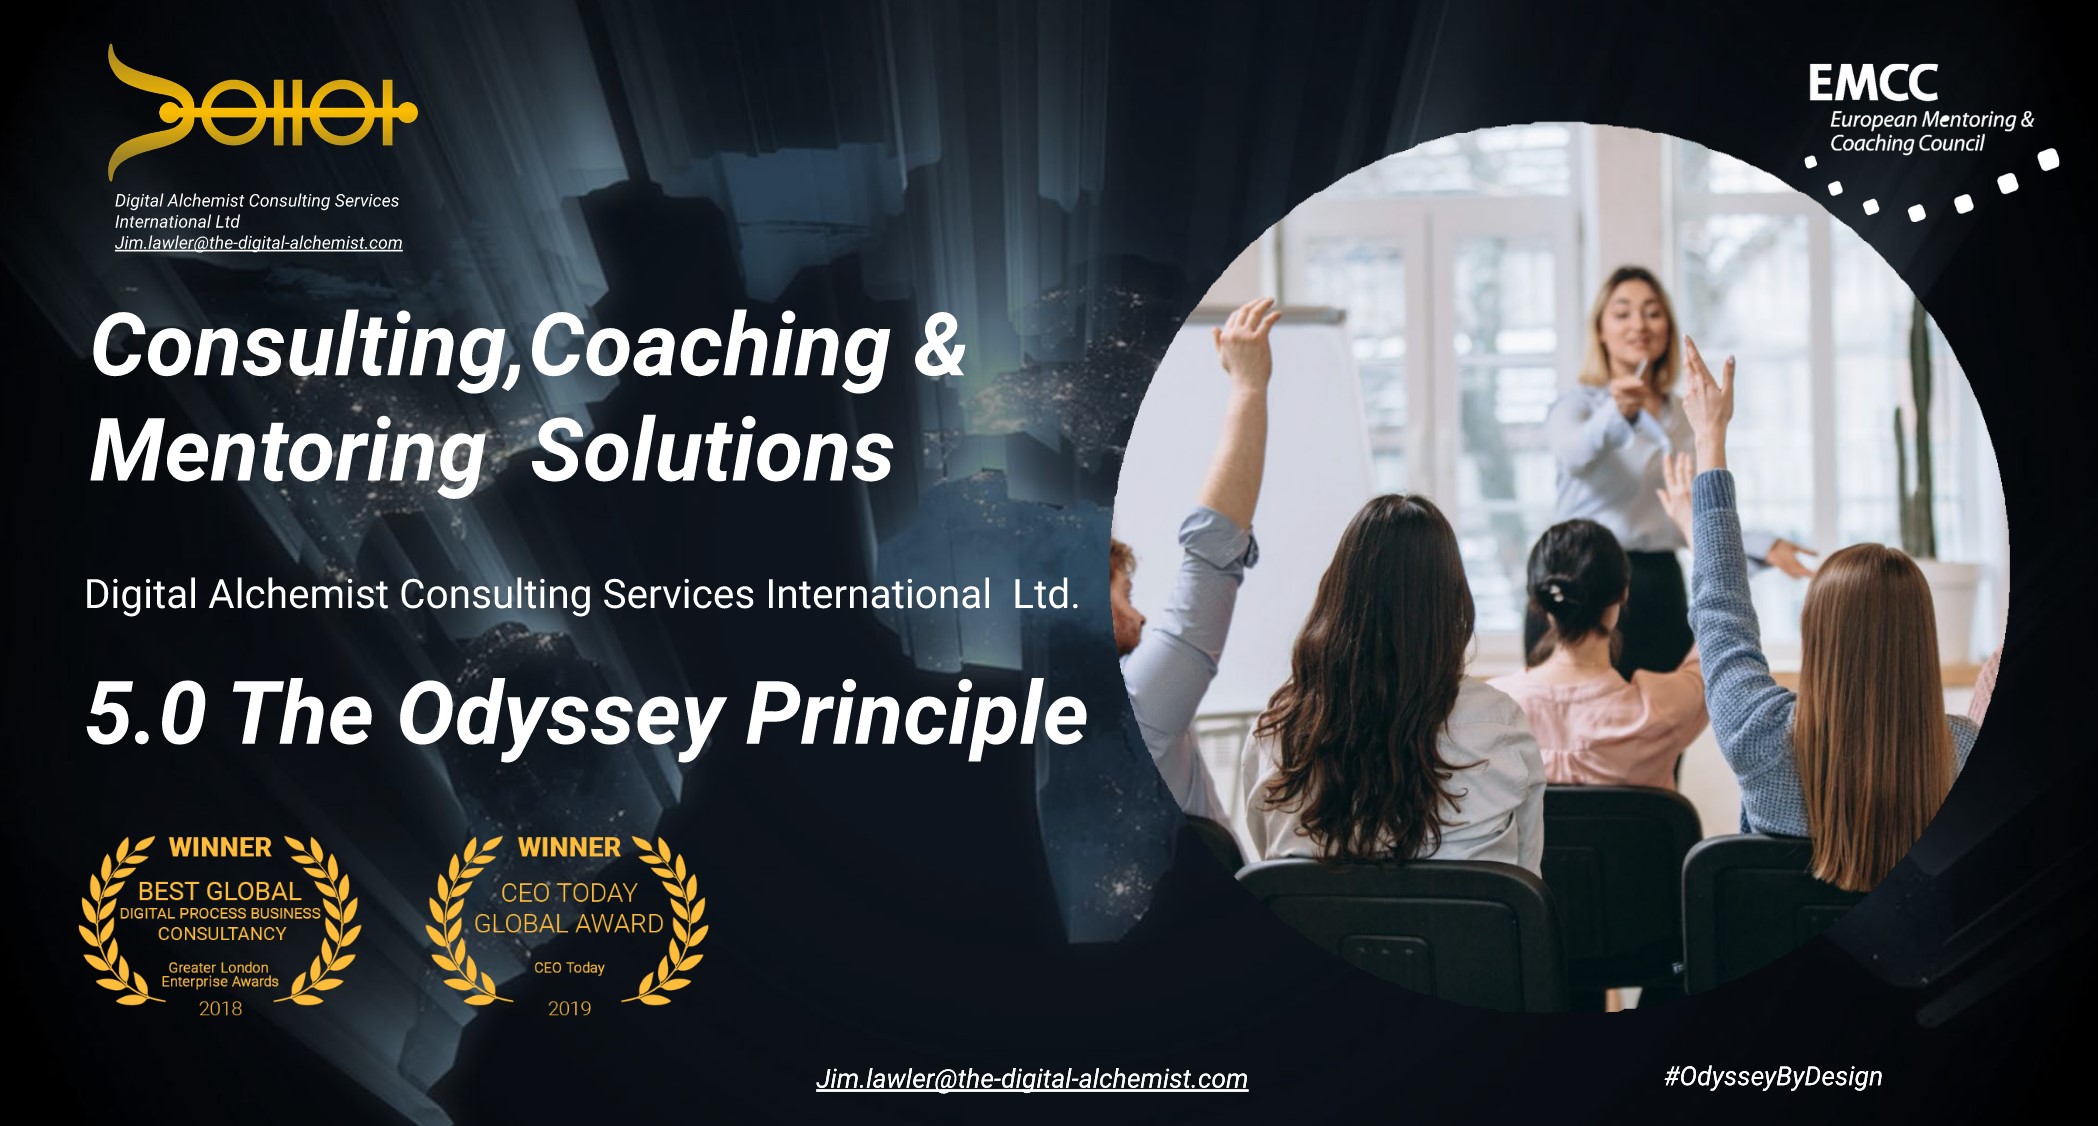 5.0 The Odyssey Principle - Consulting, Coaching & Mentoring Solutions